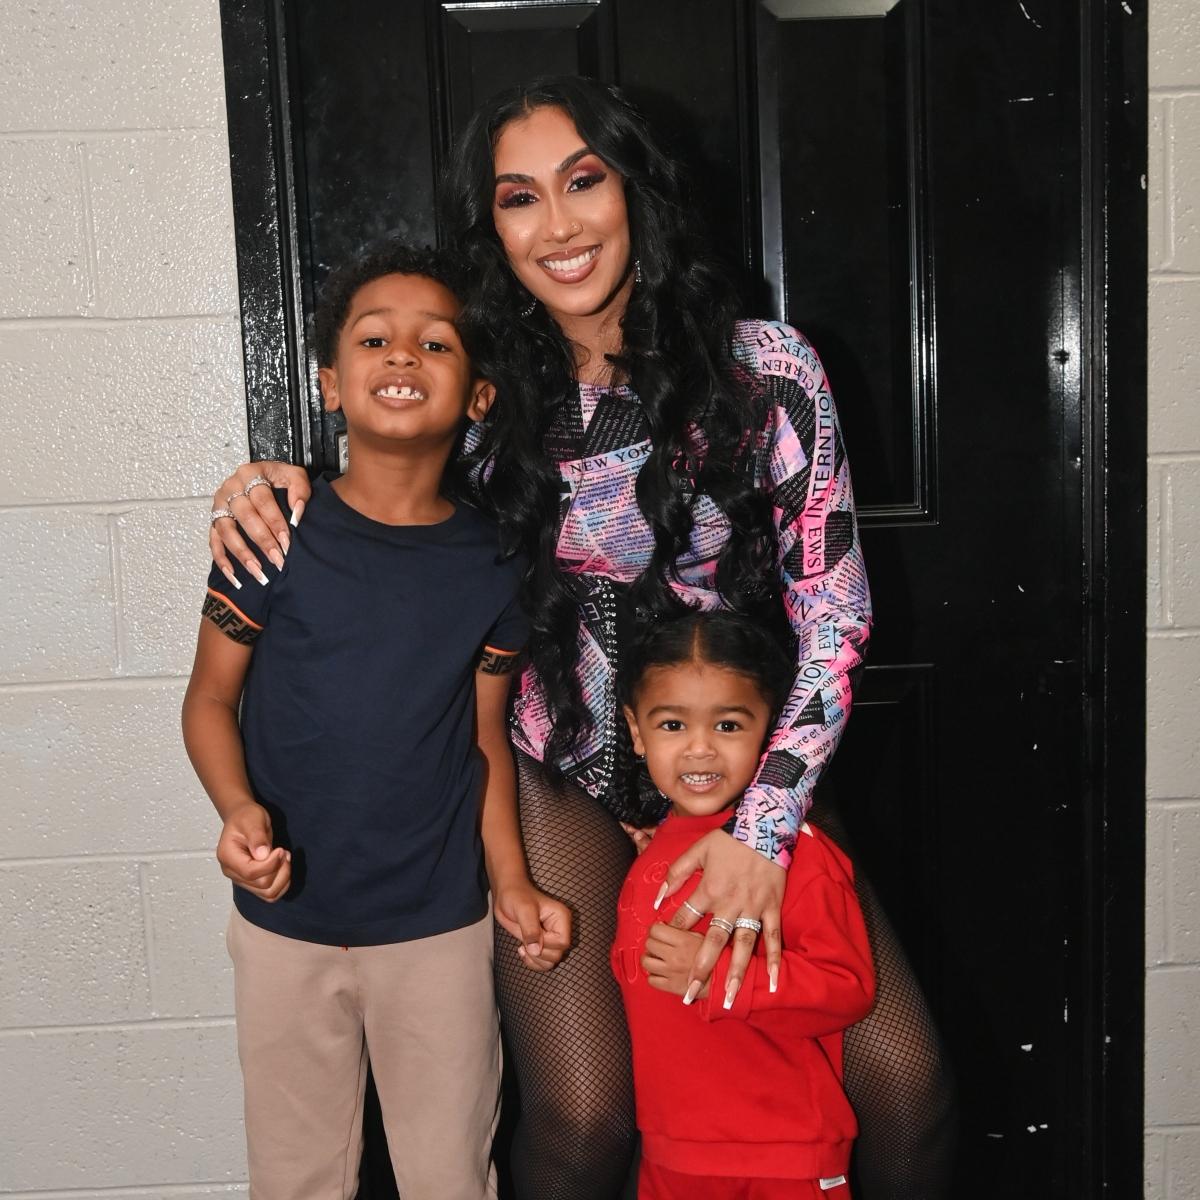 Queen Naija and her children backstage during Queen Naija "The Butterfly Tour" at Center Stage on October 17, 2021 in Atlanta, Georgia